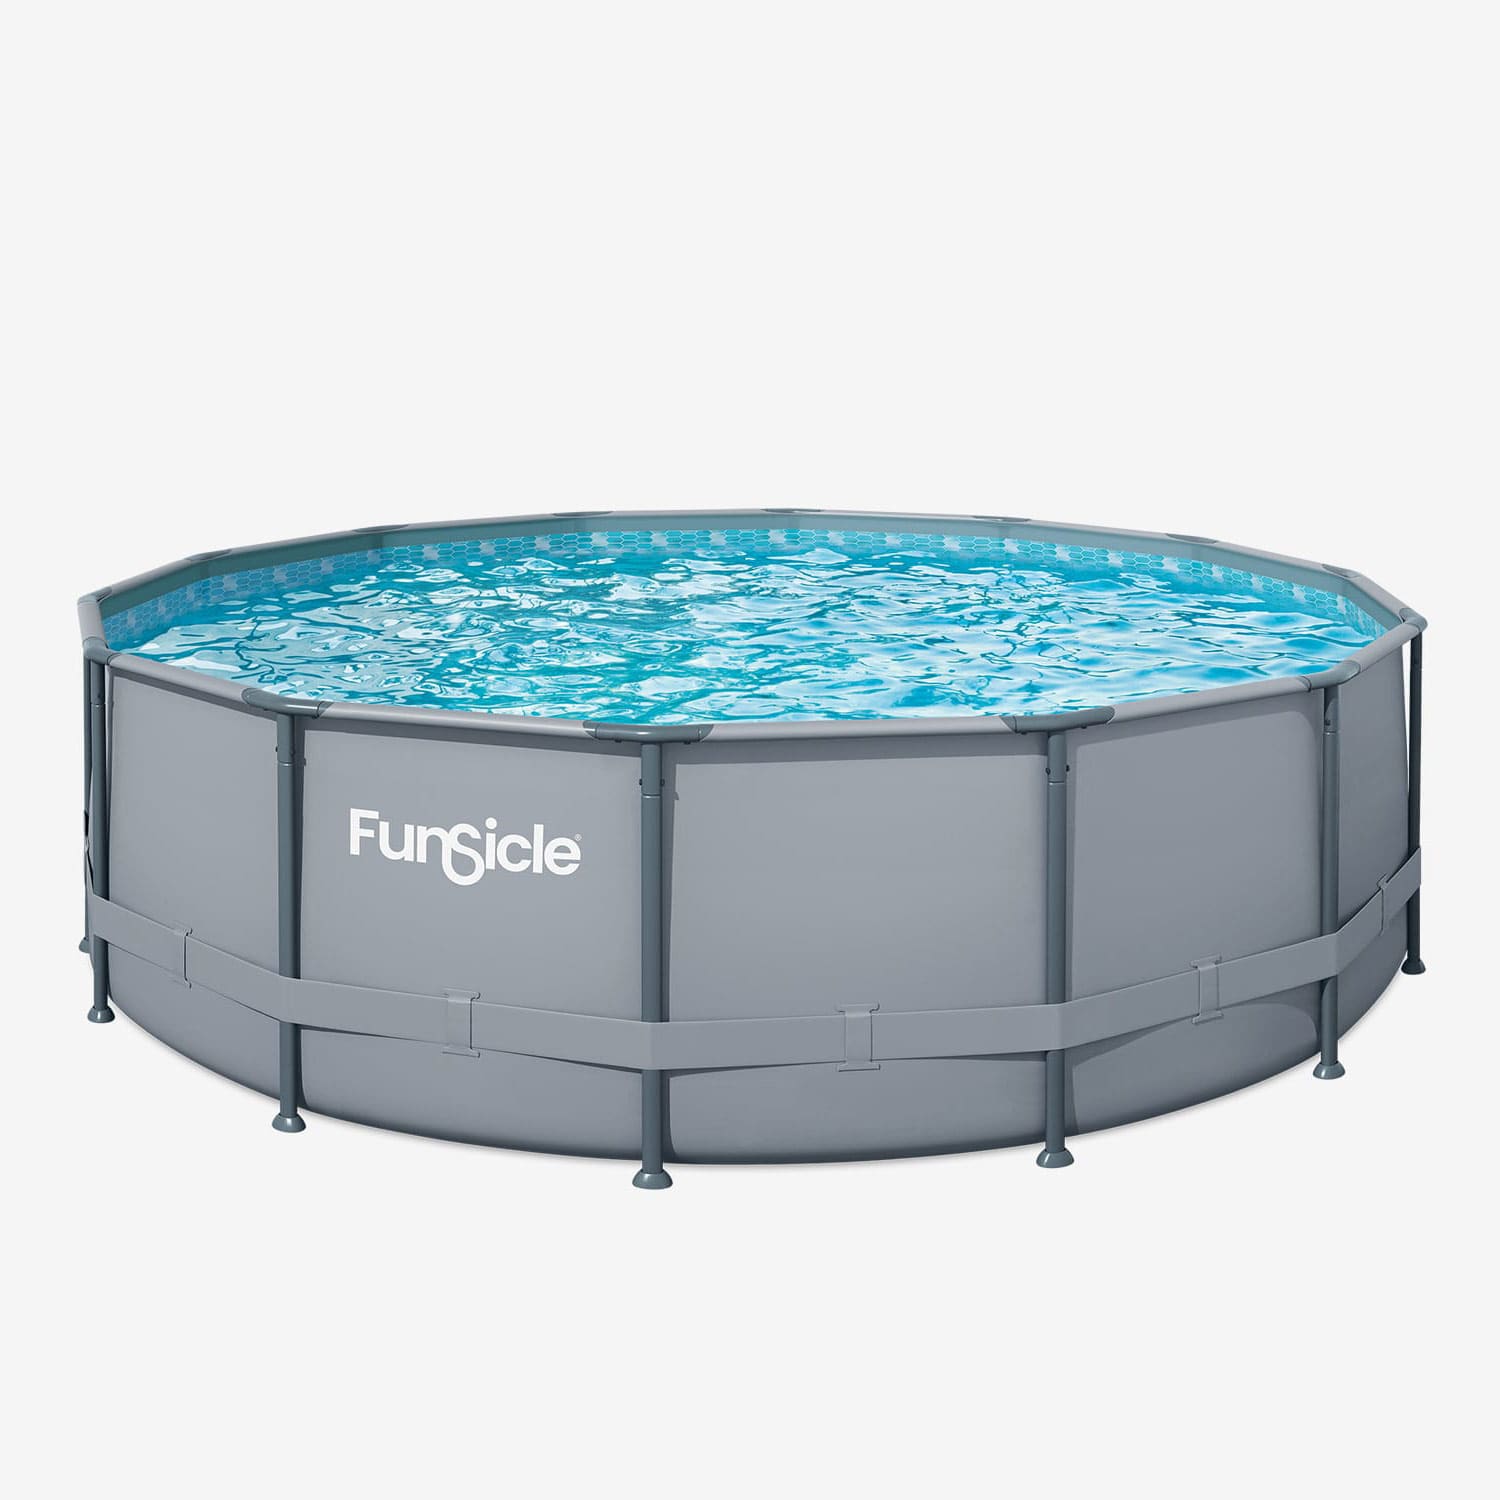  Funsicle 16 ft Oasis Pool without people